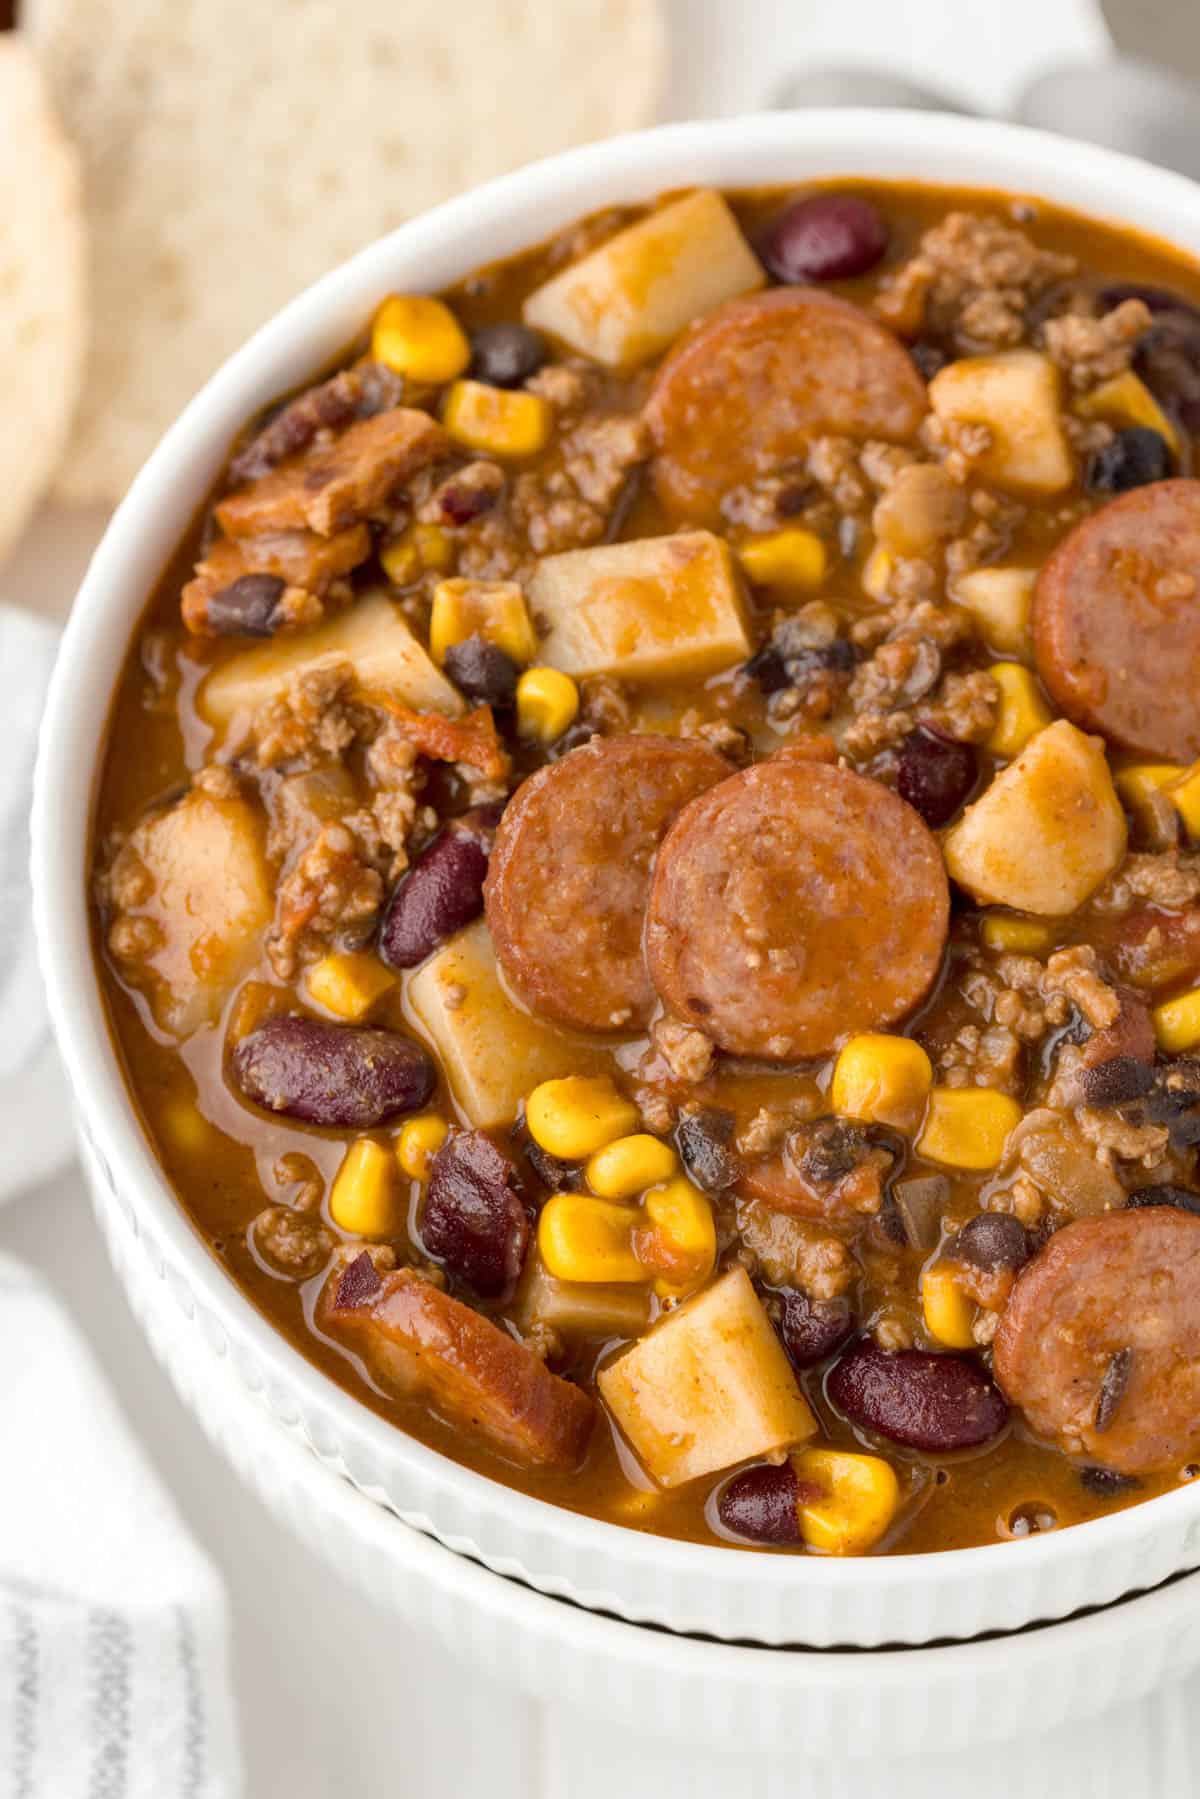 A hearty bowl of cowboy stew.